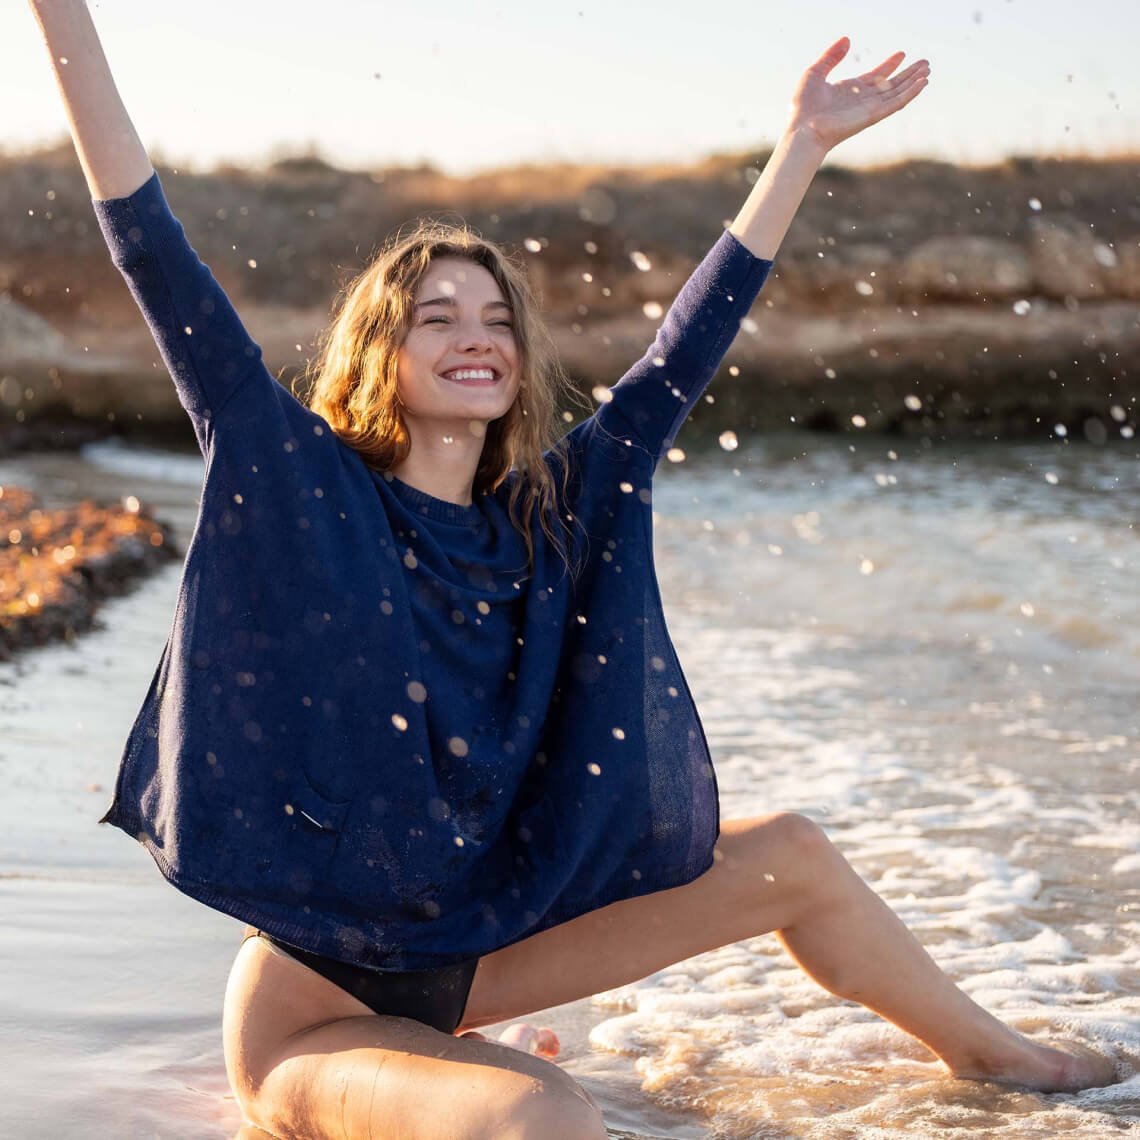 women wearing deepwater catalina sweater throwing water in the air sitting on the beach in a swimsuit